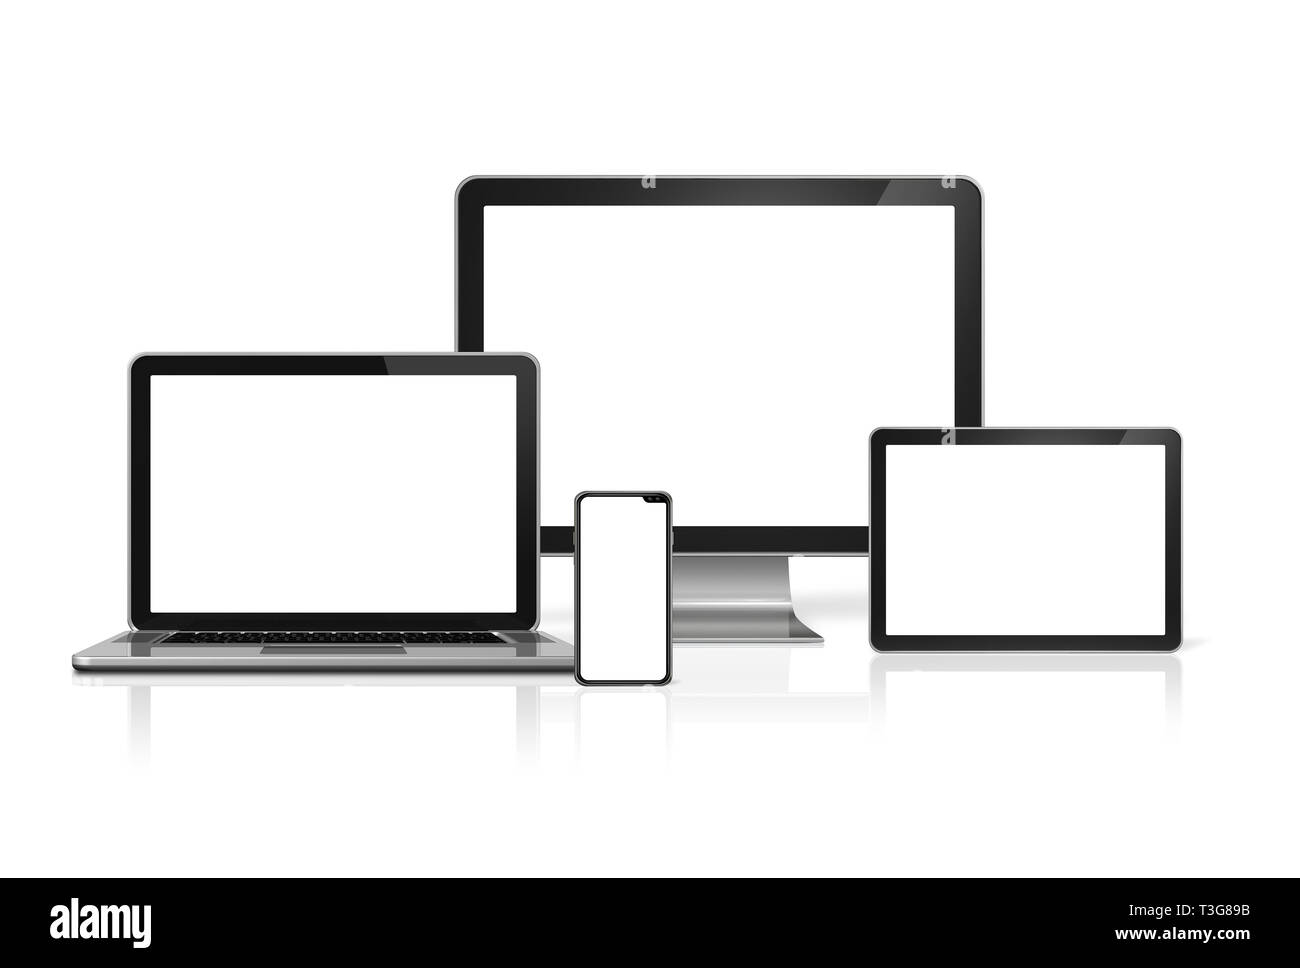 Computers and phone set mockup isolated on white background with blank ...